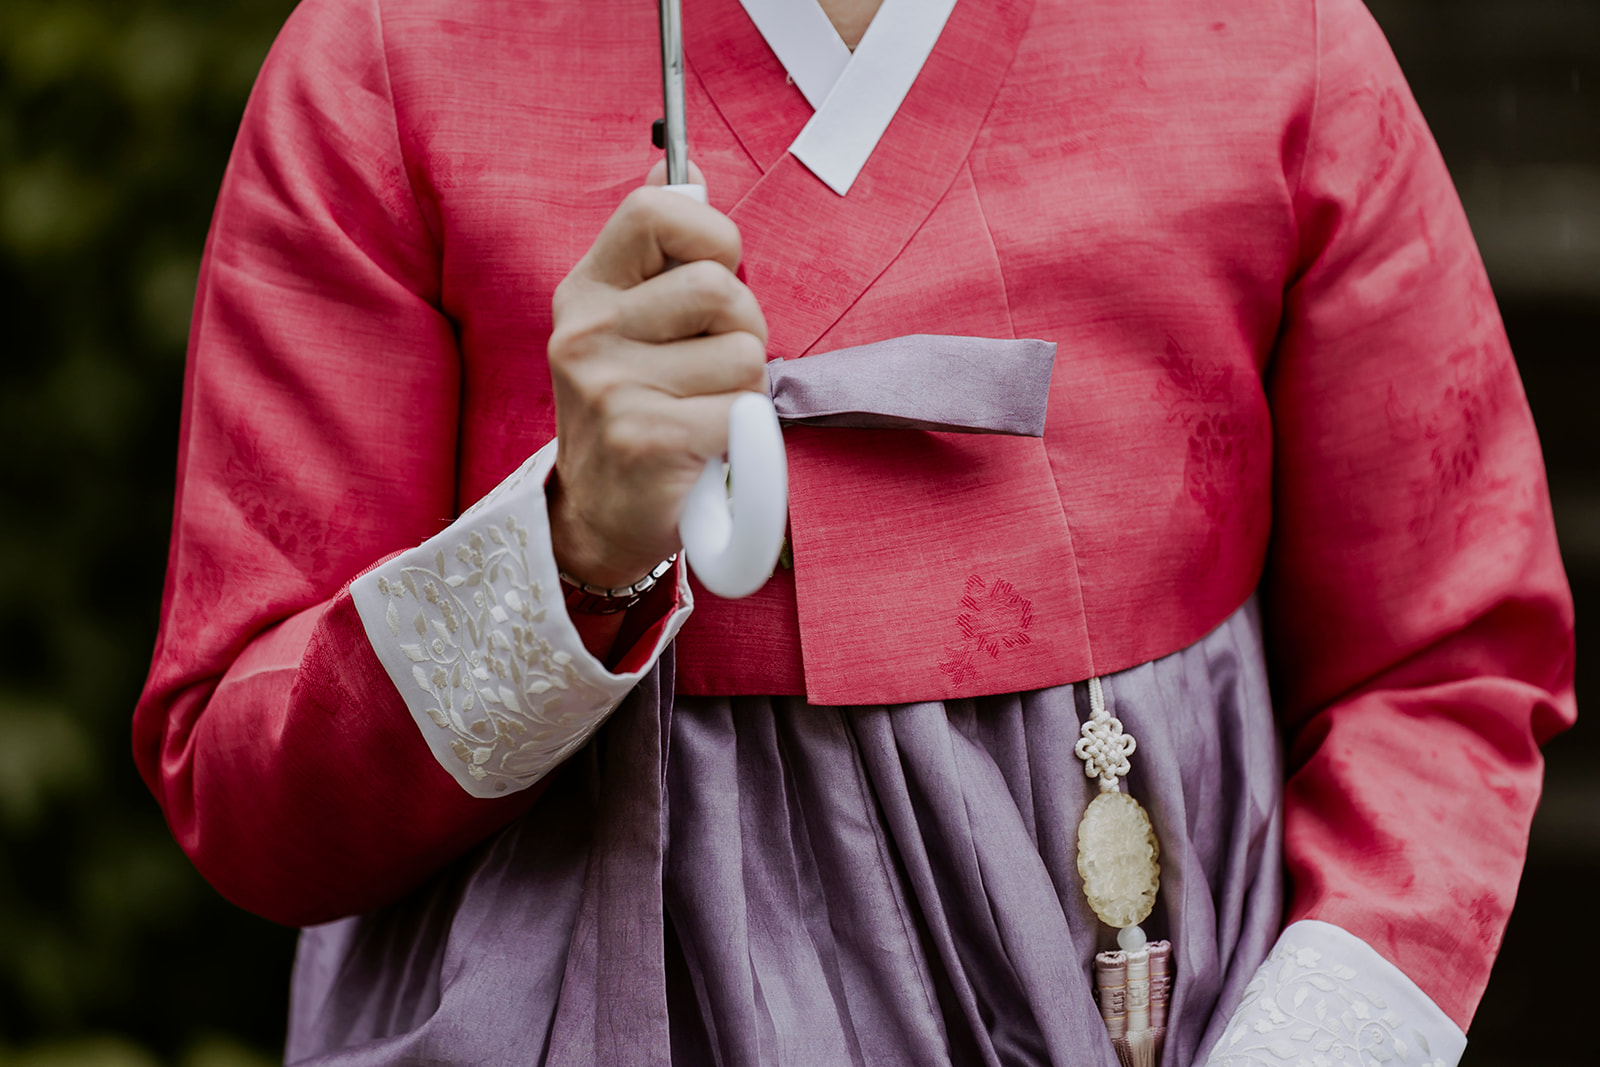 A woman in a pink hanbok.